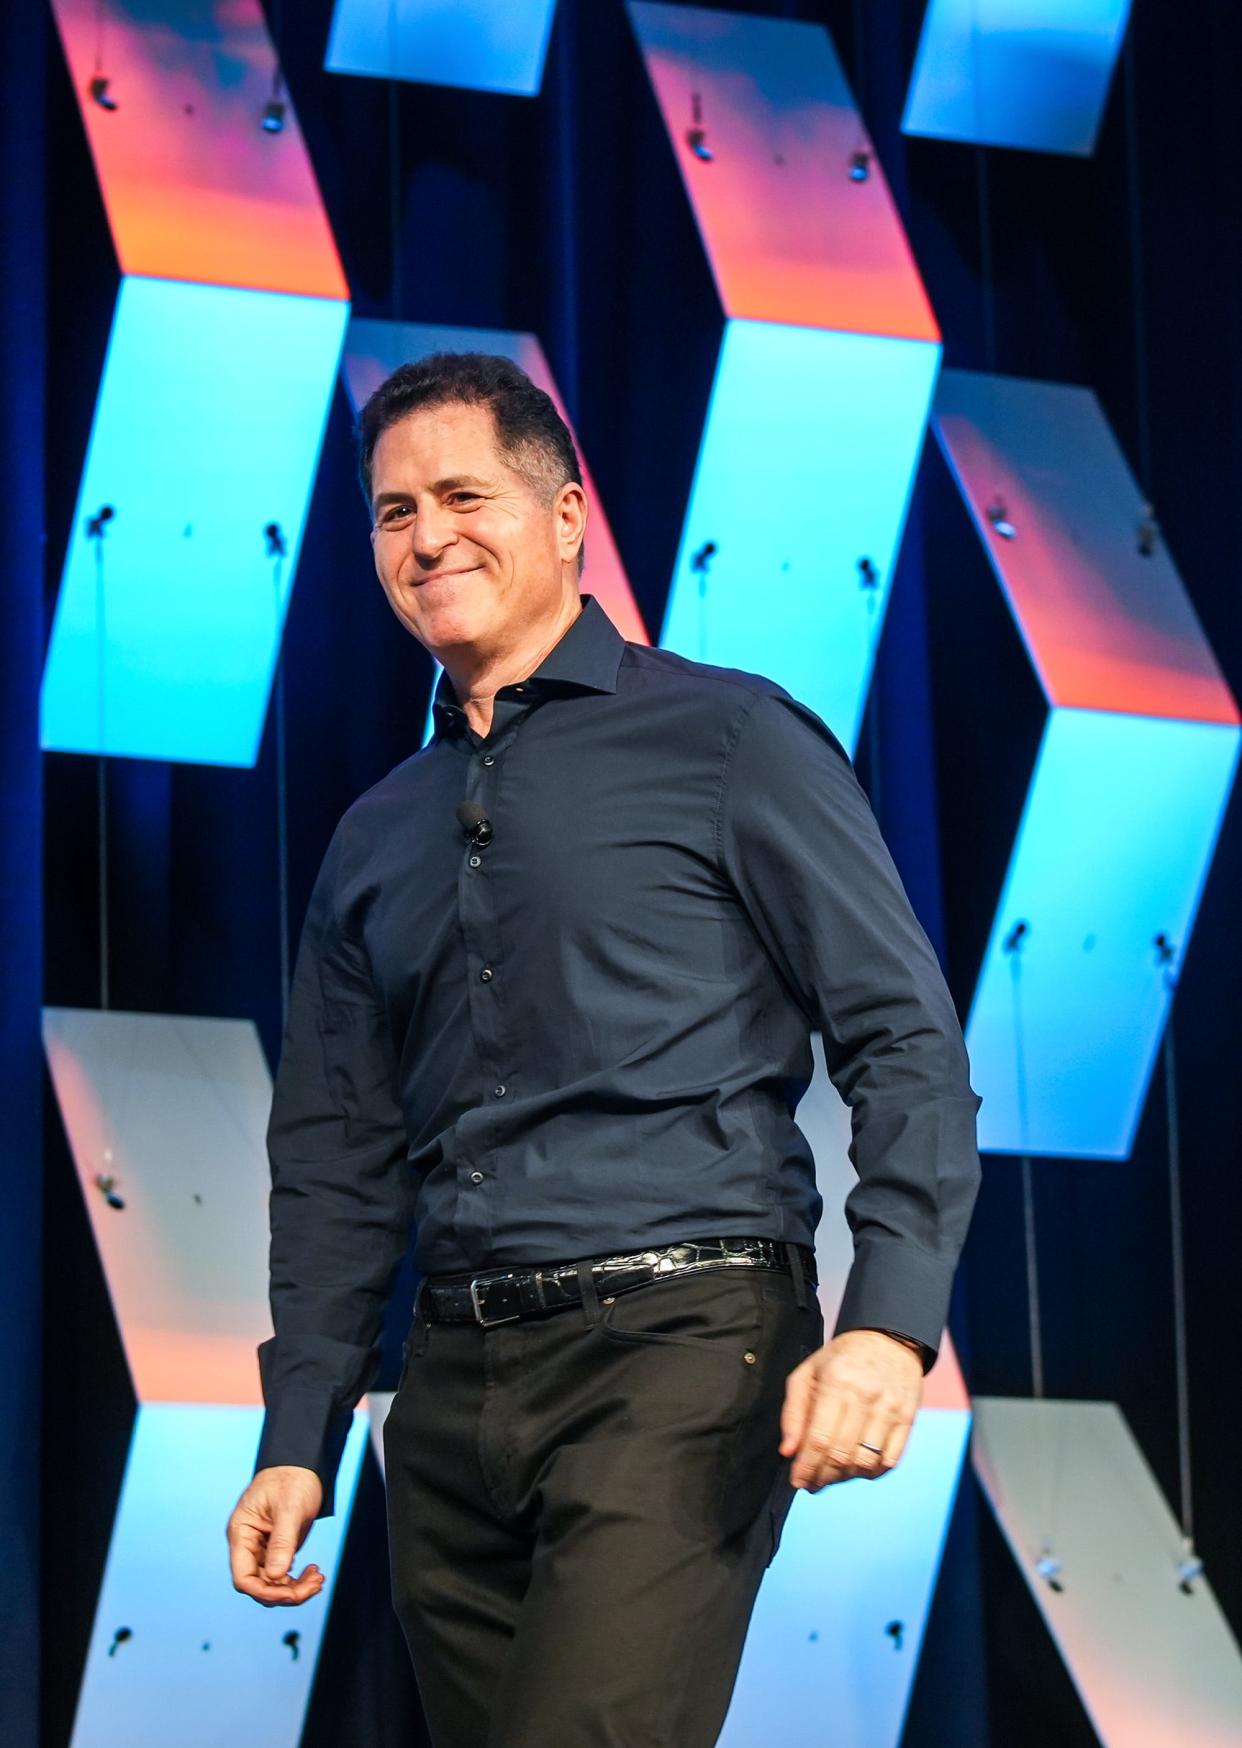 Michael Dell shares his views on with Patrick Moorhead about risk taking, having the courage of your convictions, reinvention, and the magic of Austin after 40 years in business during a SXSW panel Business, Life, and the Magic of Austin on Thursday, March 14, 2024.